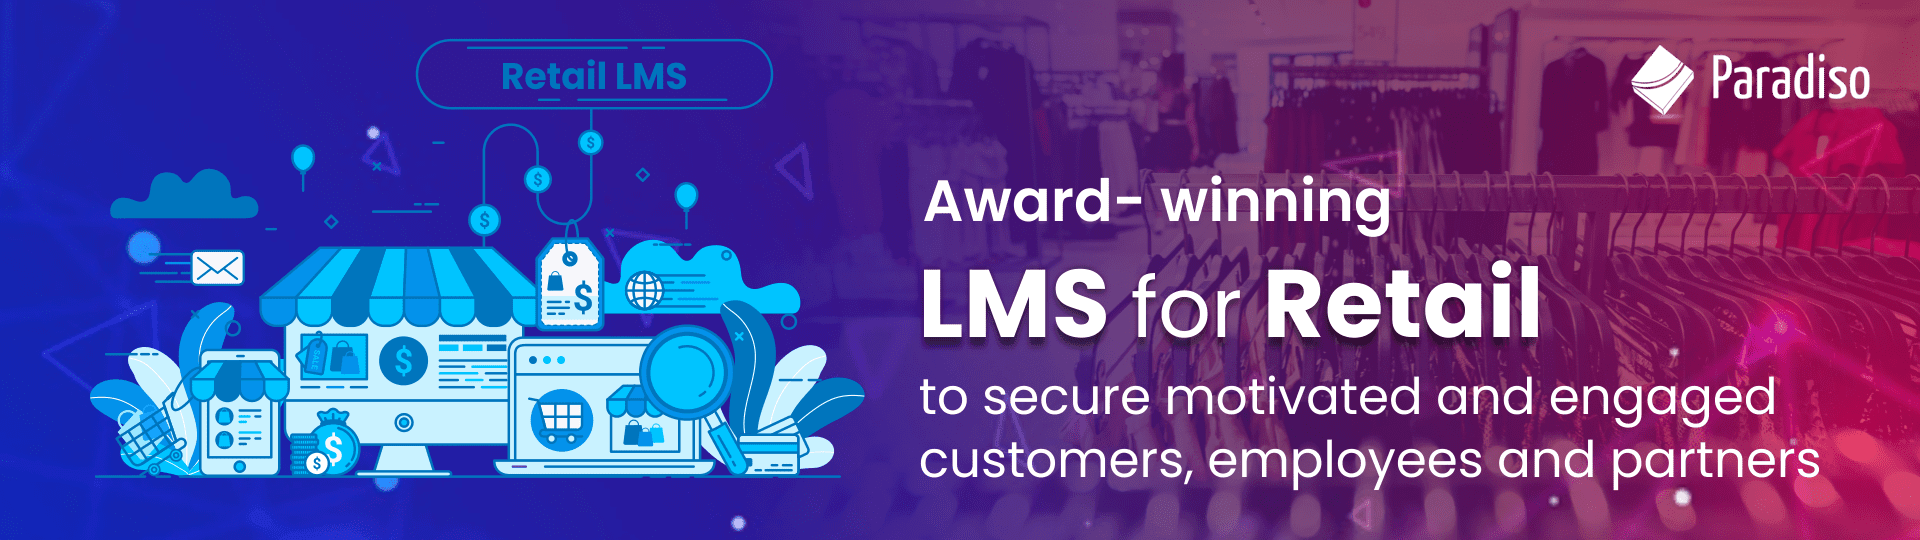 Award- winning LMS for retail to secure motivated and engaged customers, employees and partners